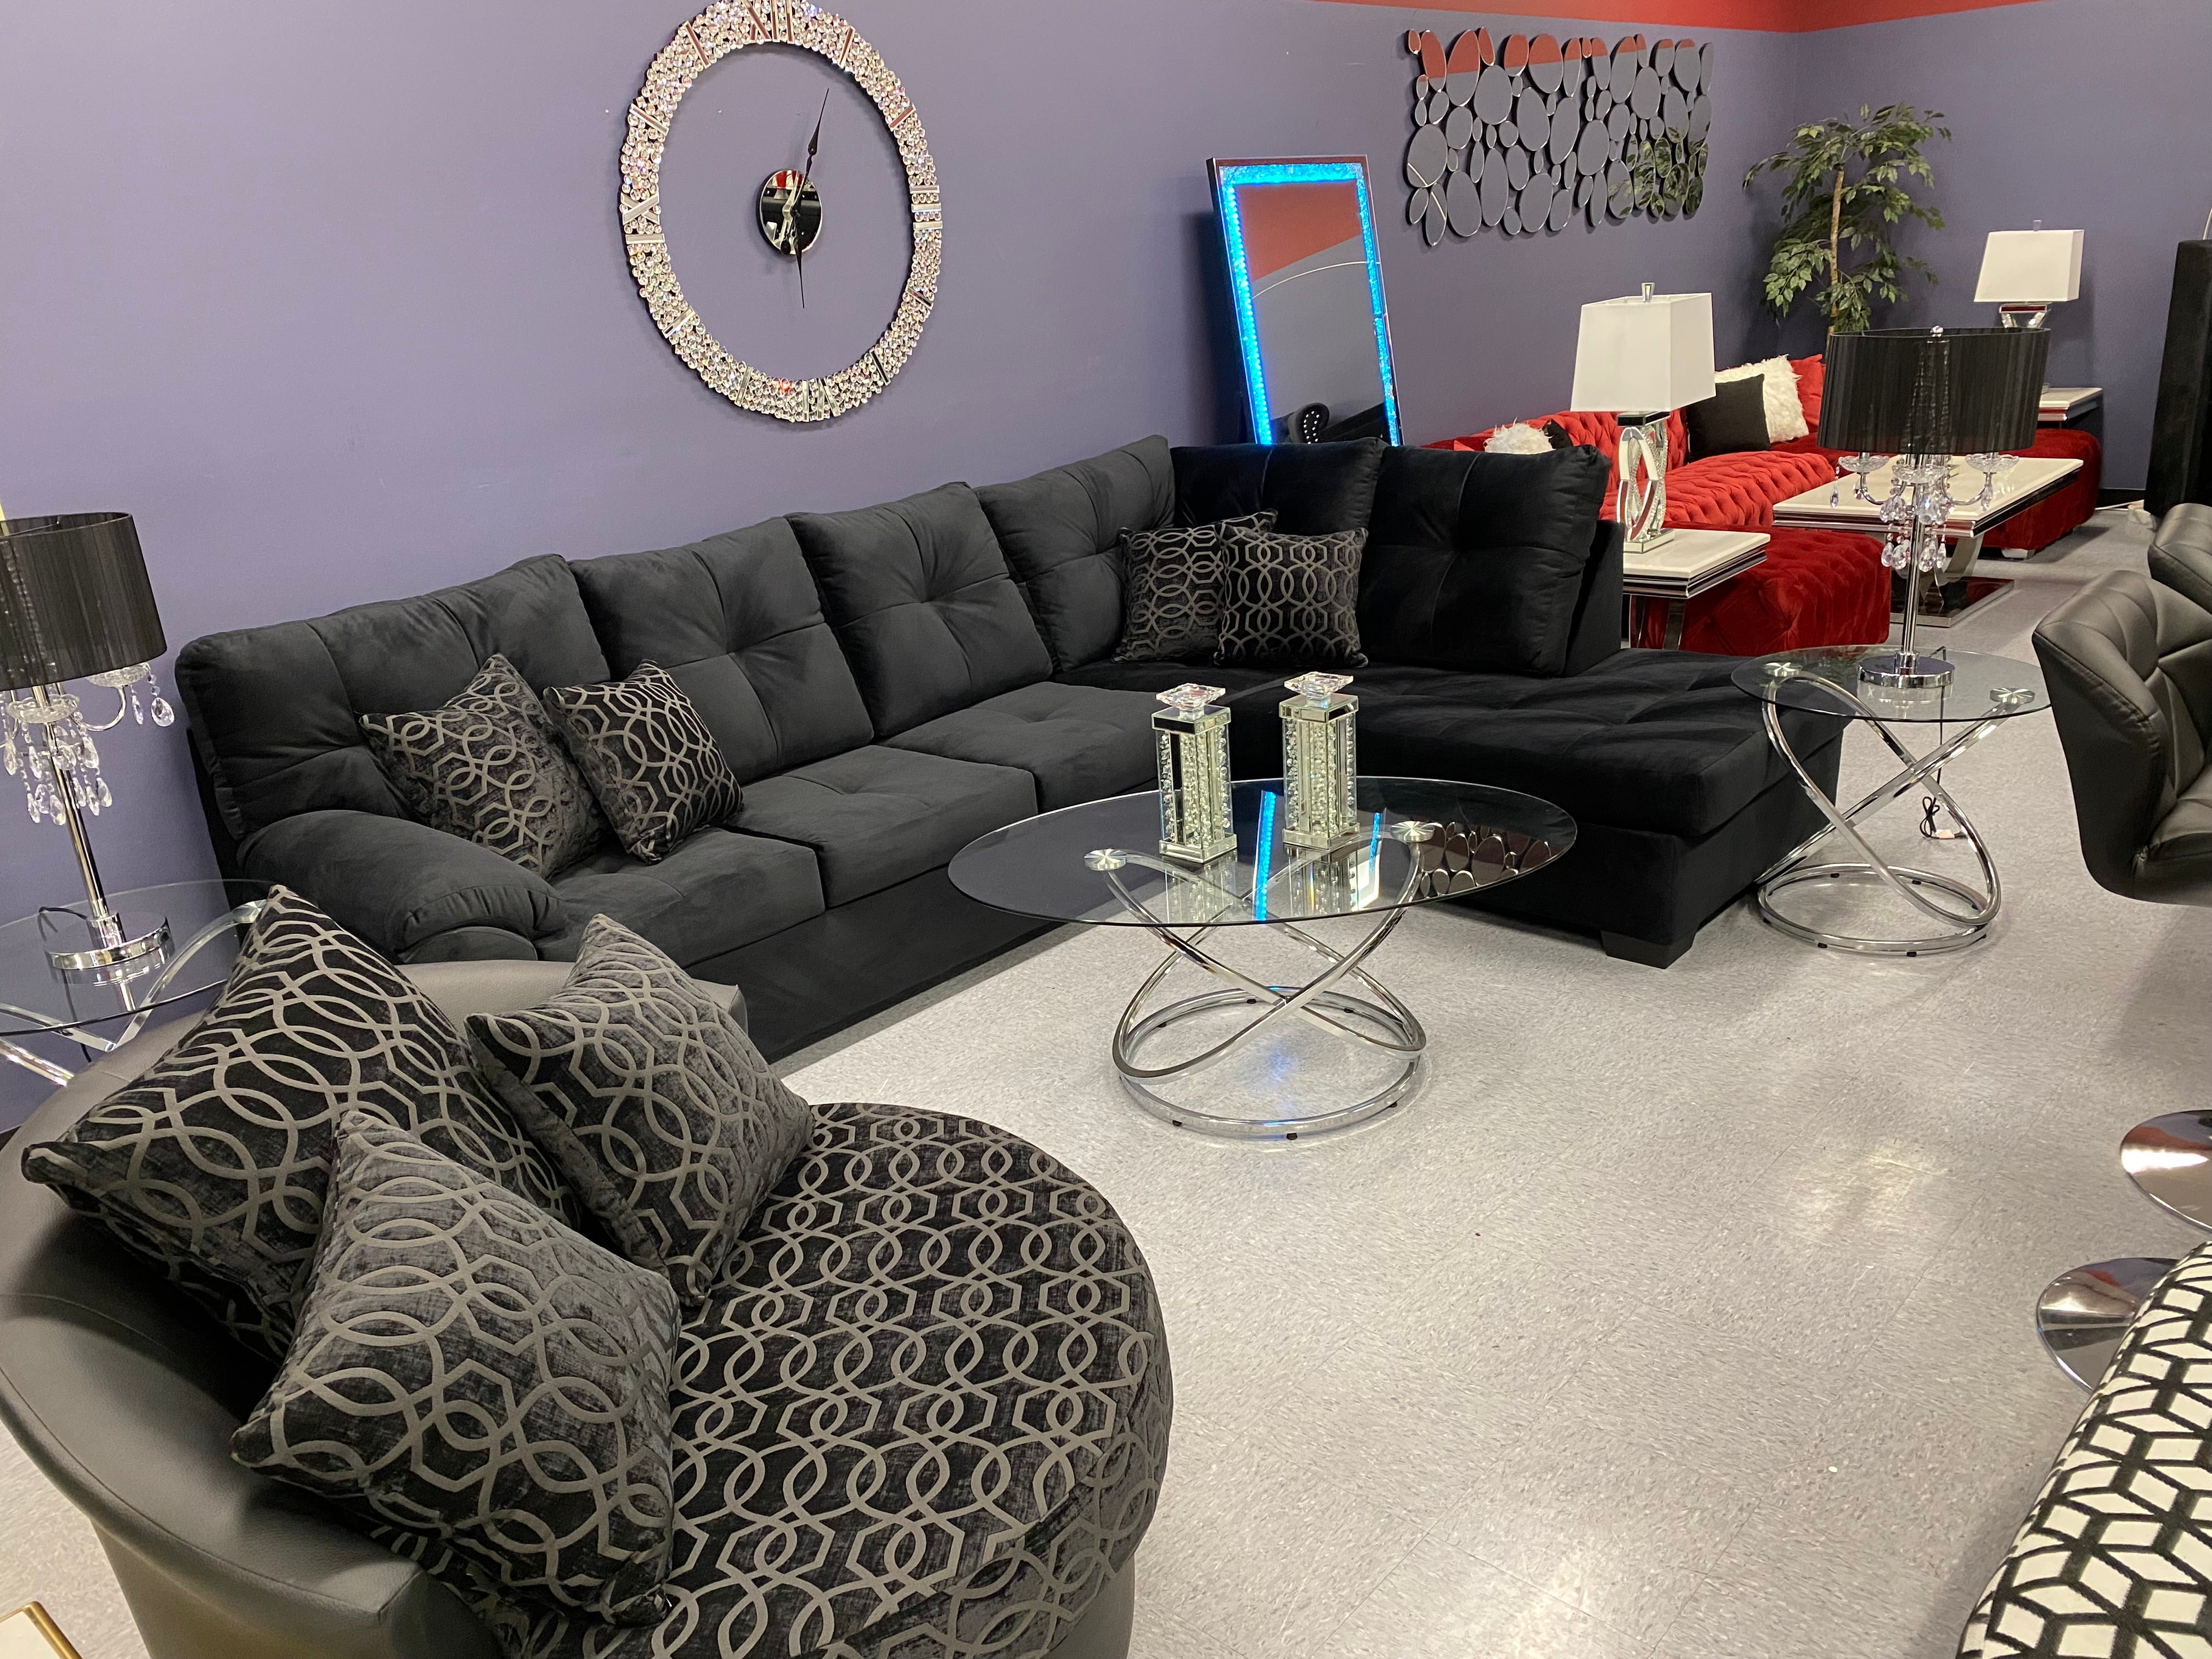 CRISTAL ROYALE Upholstered Sectional Sofa in Ebony BLACK Premium Chanel Velvet Fabric ** Available In Over 500 in house Colors and Patterns to Choose From, ** Custom Made To Order ** Design It Your Way